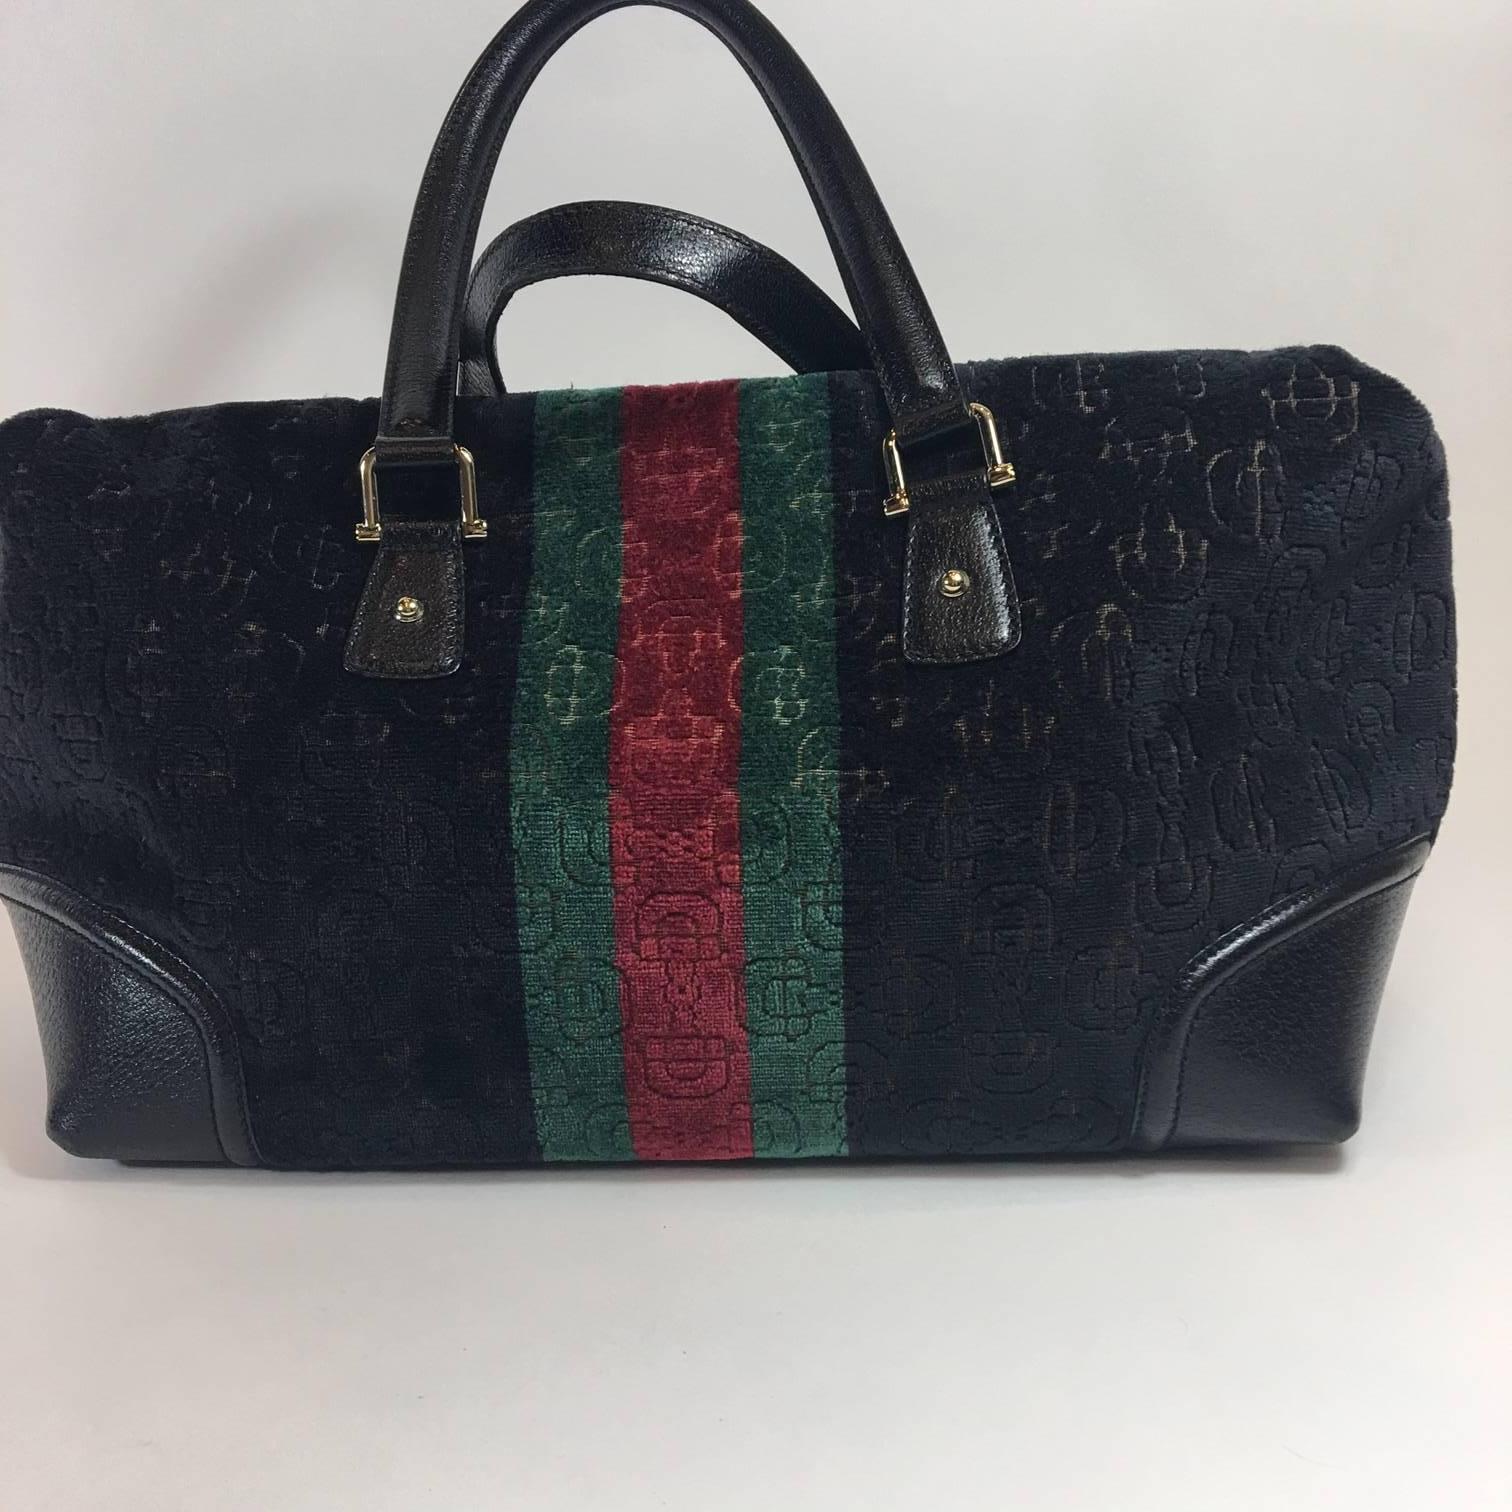 Fall/Winter will have you grabbing hold of this classic beauty. Gucci Treasure Boston bag in the perfect size for every day use. Black velvet with classic green and red center stripe - fabric is soft, horsebit embossed velvet with black leather